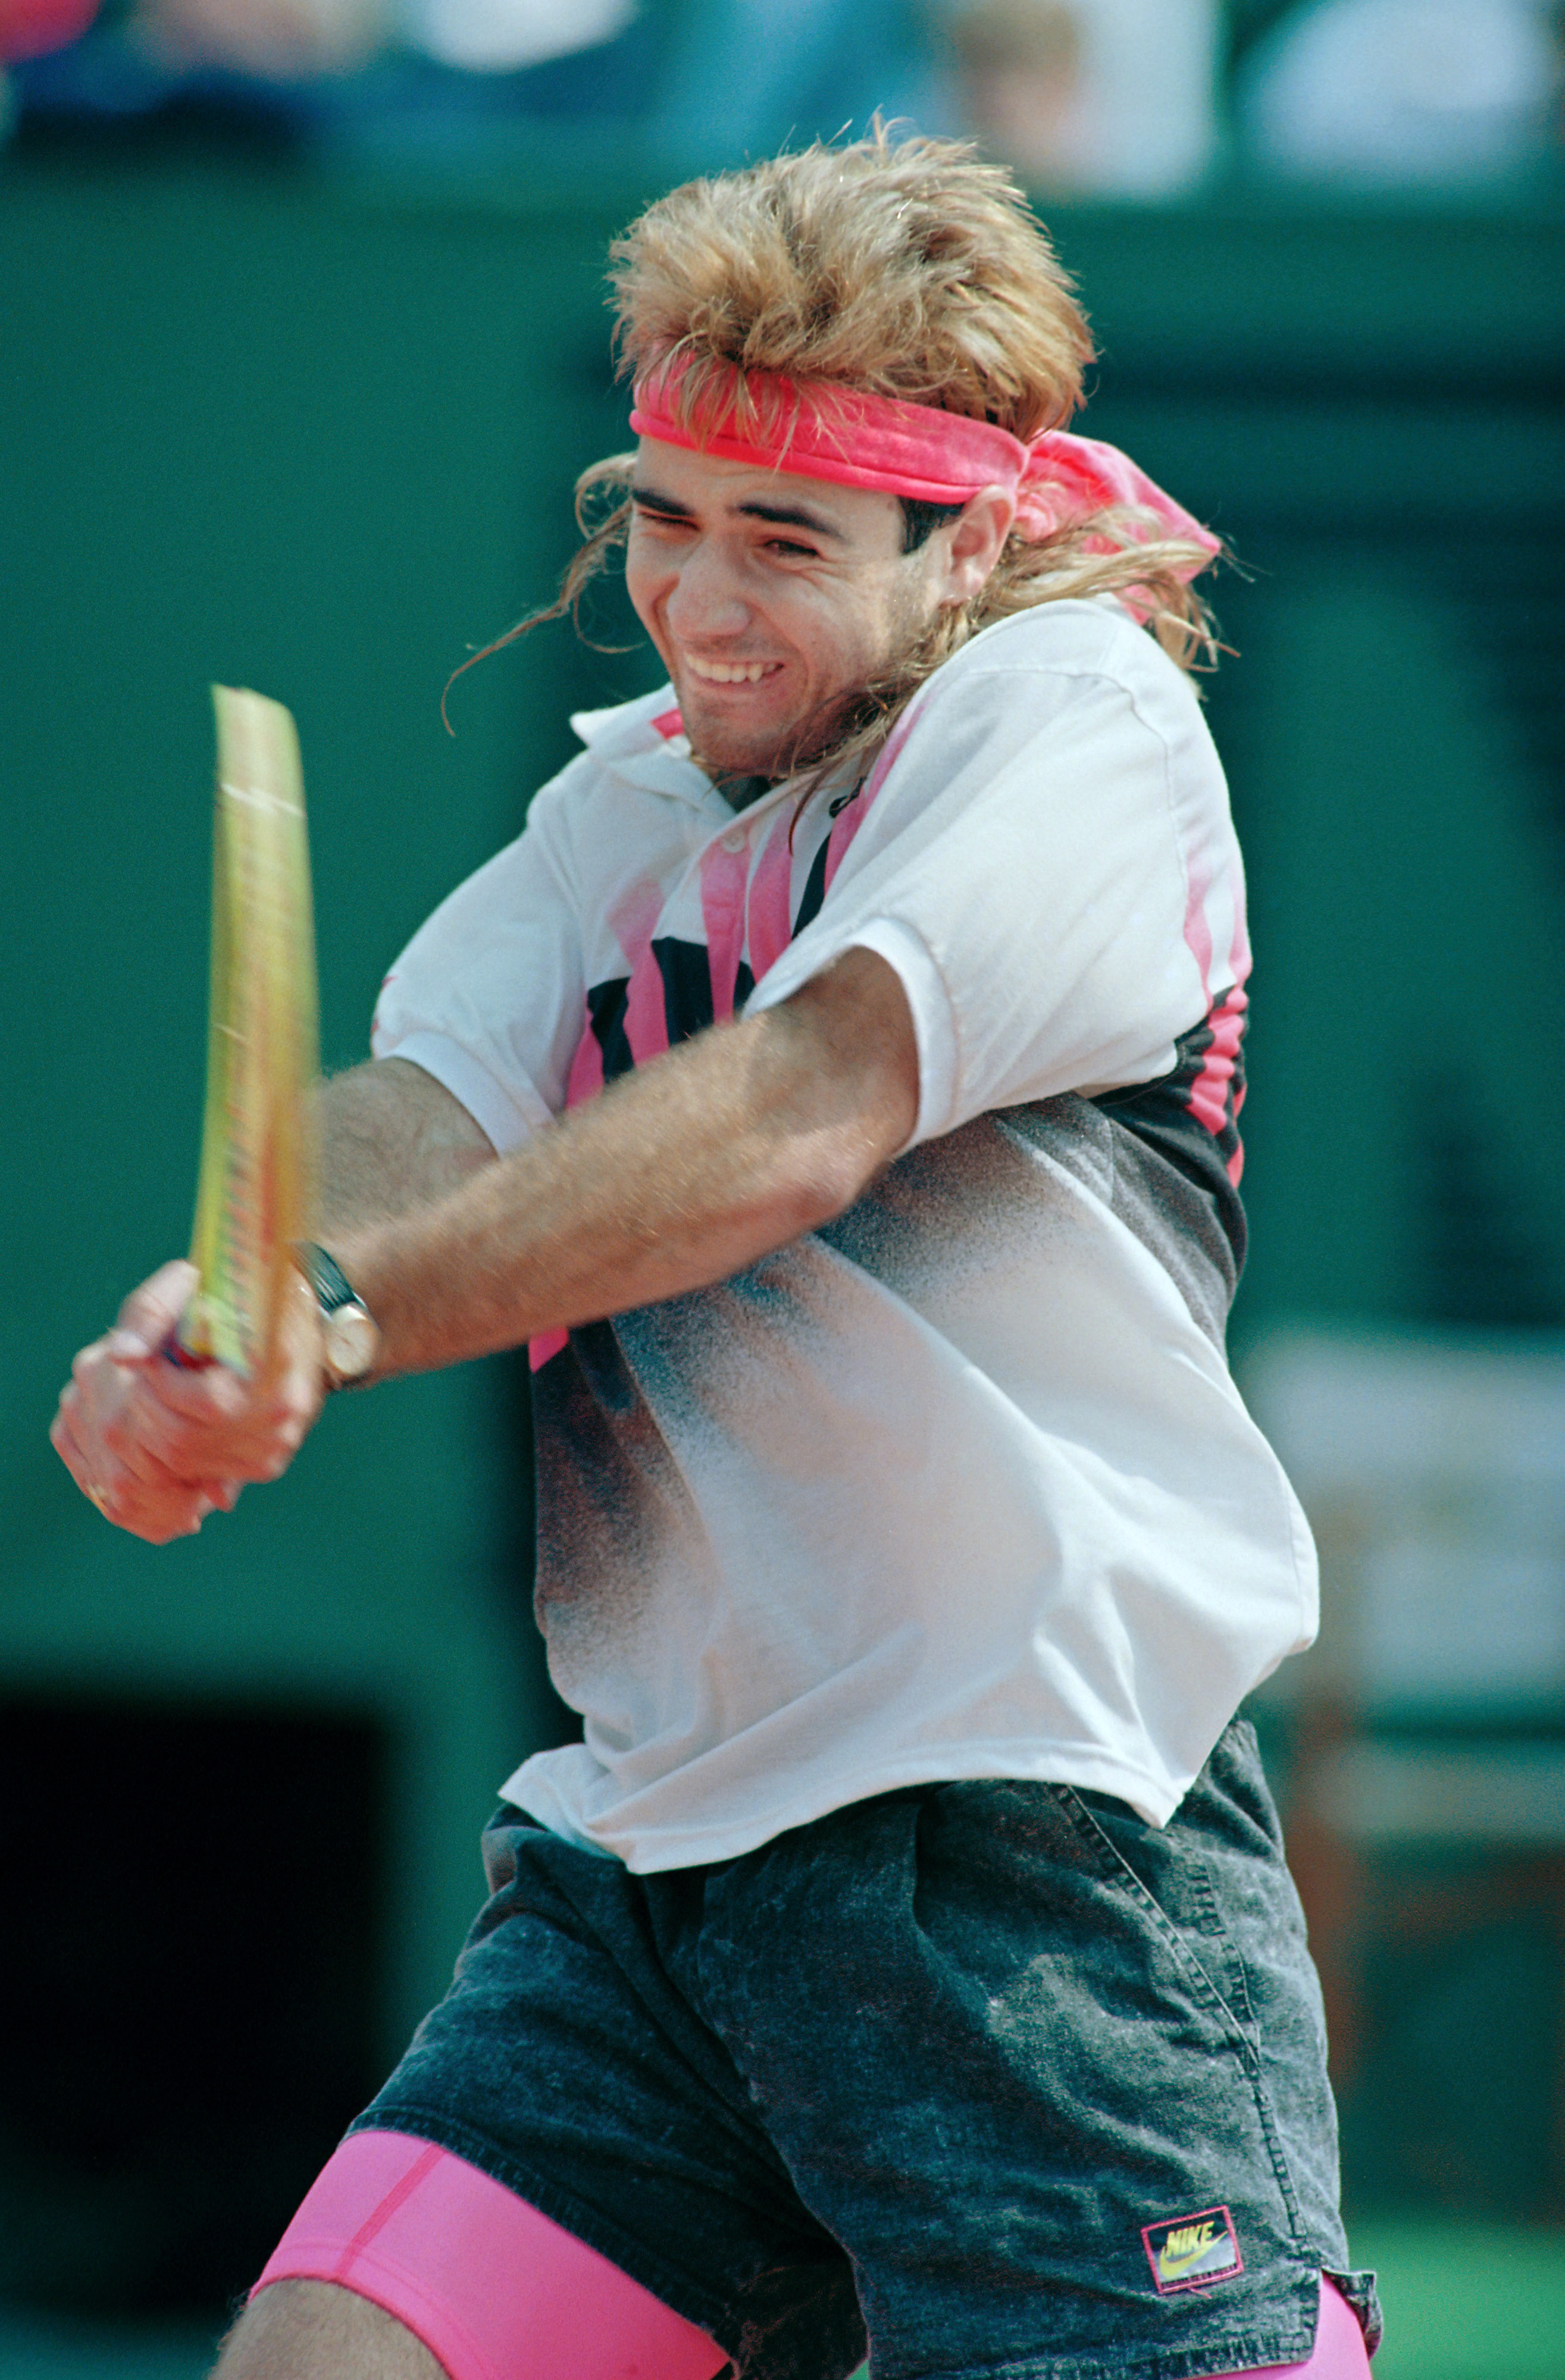 U.S. tennis player Andre Agassi hits the ball in his match against Ecuadorian Andres Gomez during the Men's French Open final on June 10, 1990 at Roland Garros stadium in Paris. (Pierre Verdy—AFP/Getty Images)